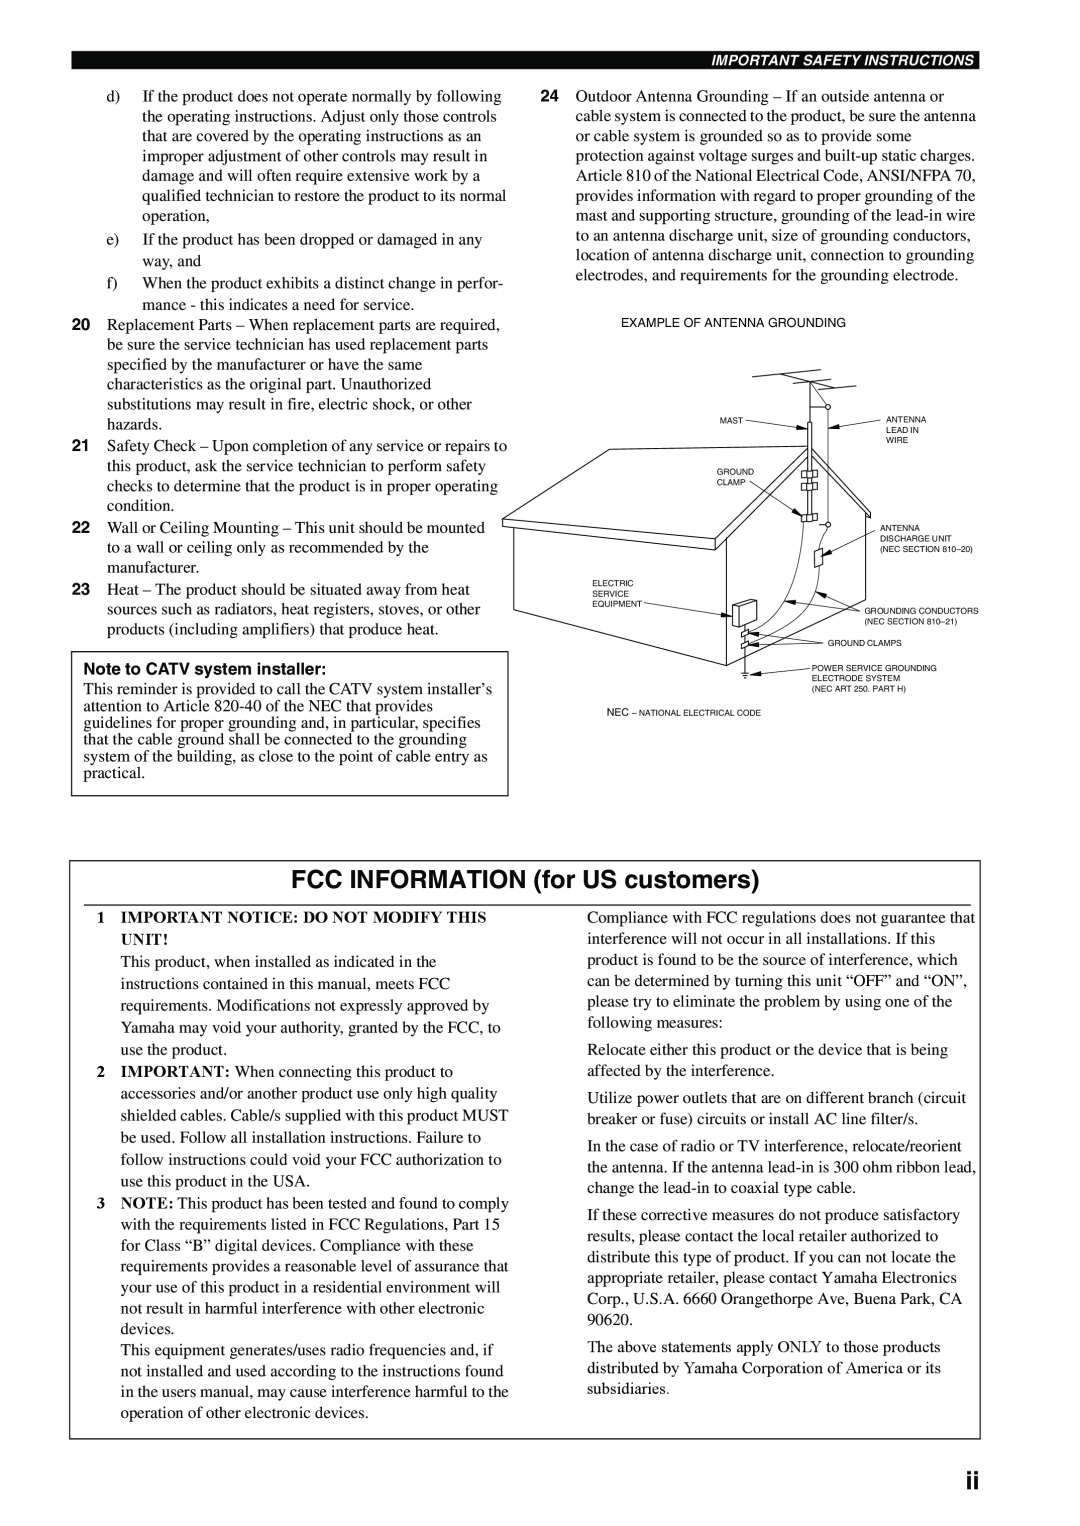 Yamaha RX-V559 owner manual FCC INFORMATION for US customers, Note to CATV system installer 